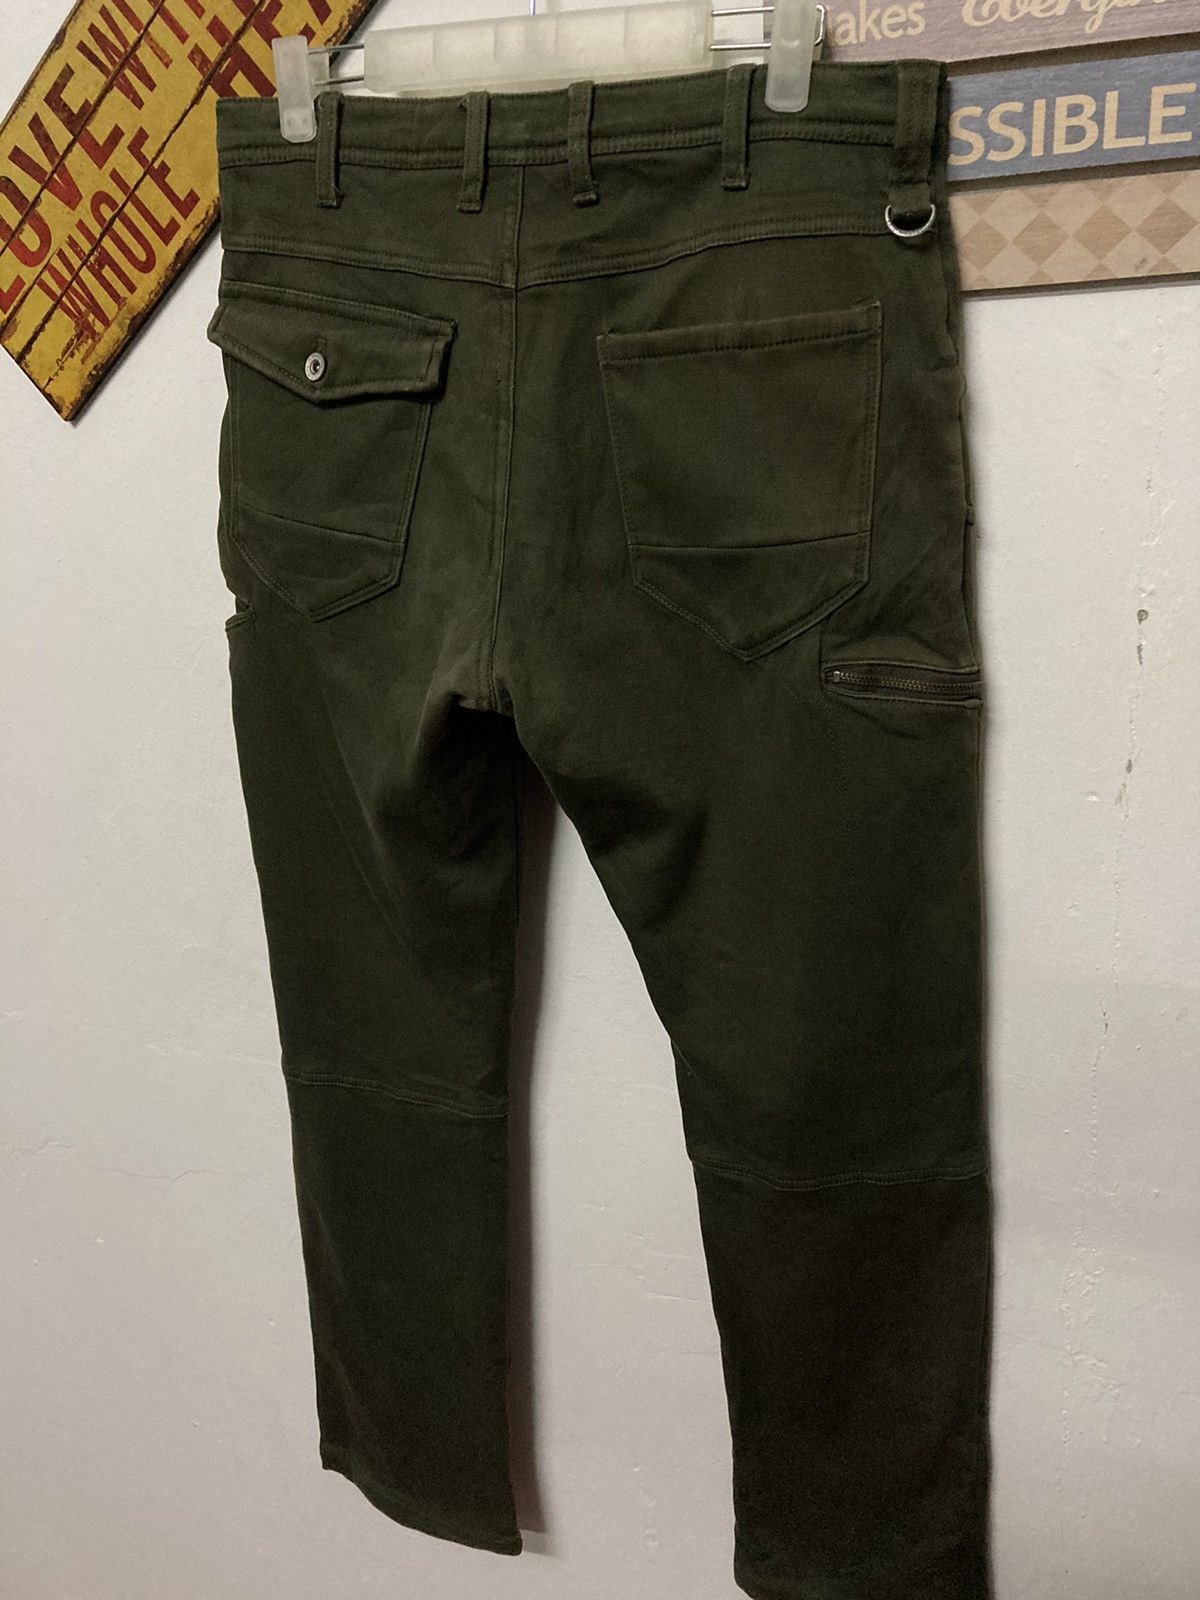 Vintage - Fieldcore Tactical Outdoor Thermal Pants - 5